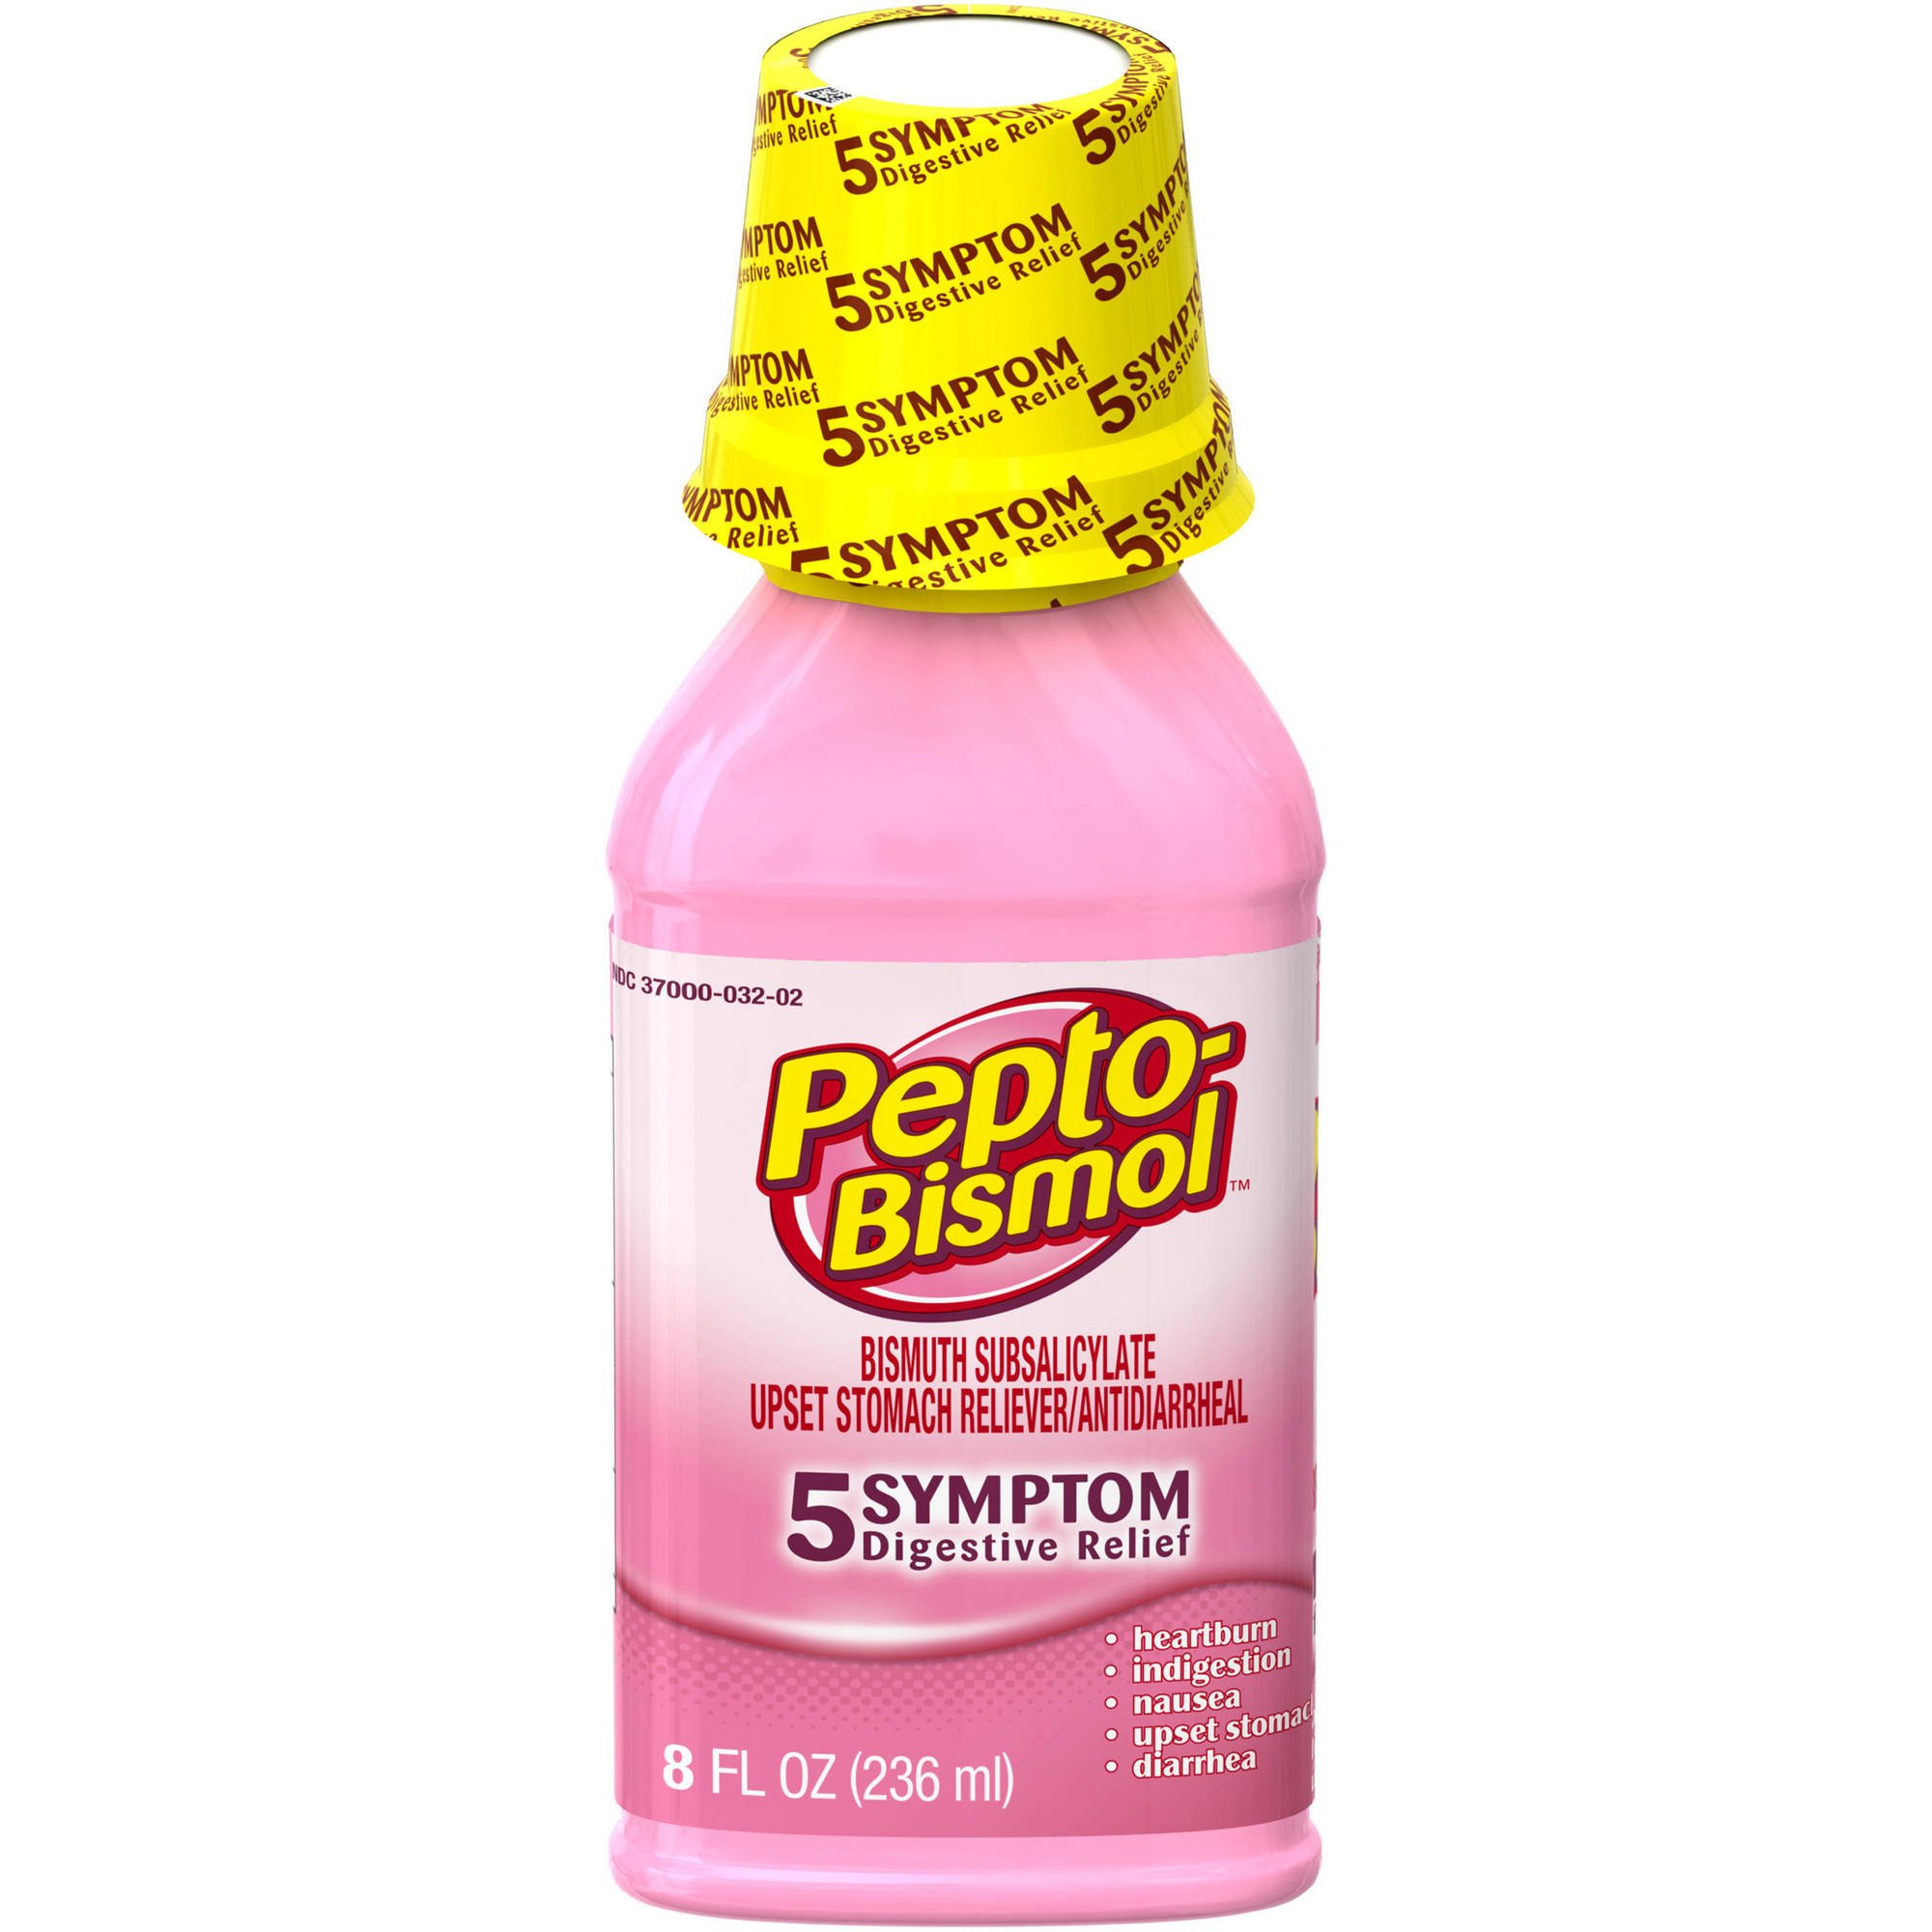 What dosage of Pepto